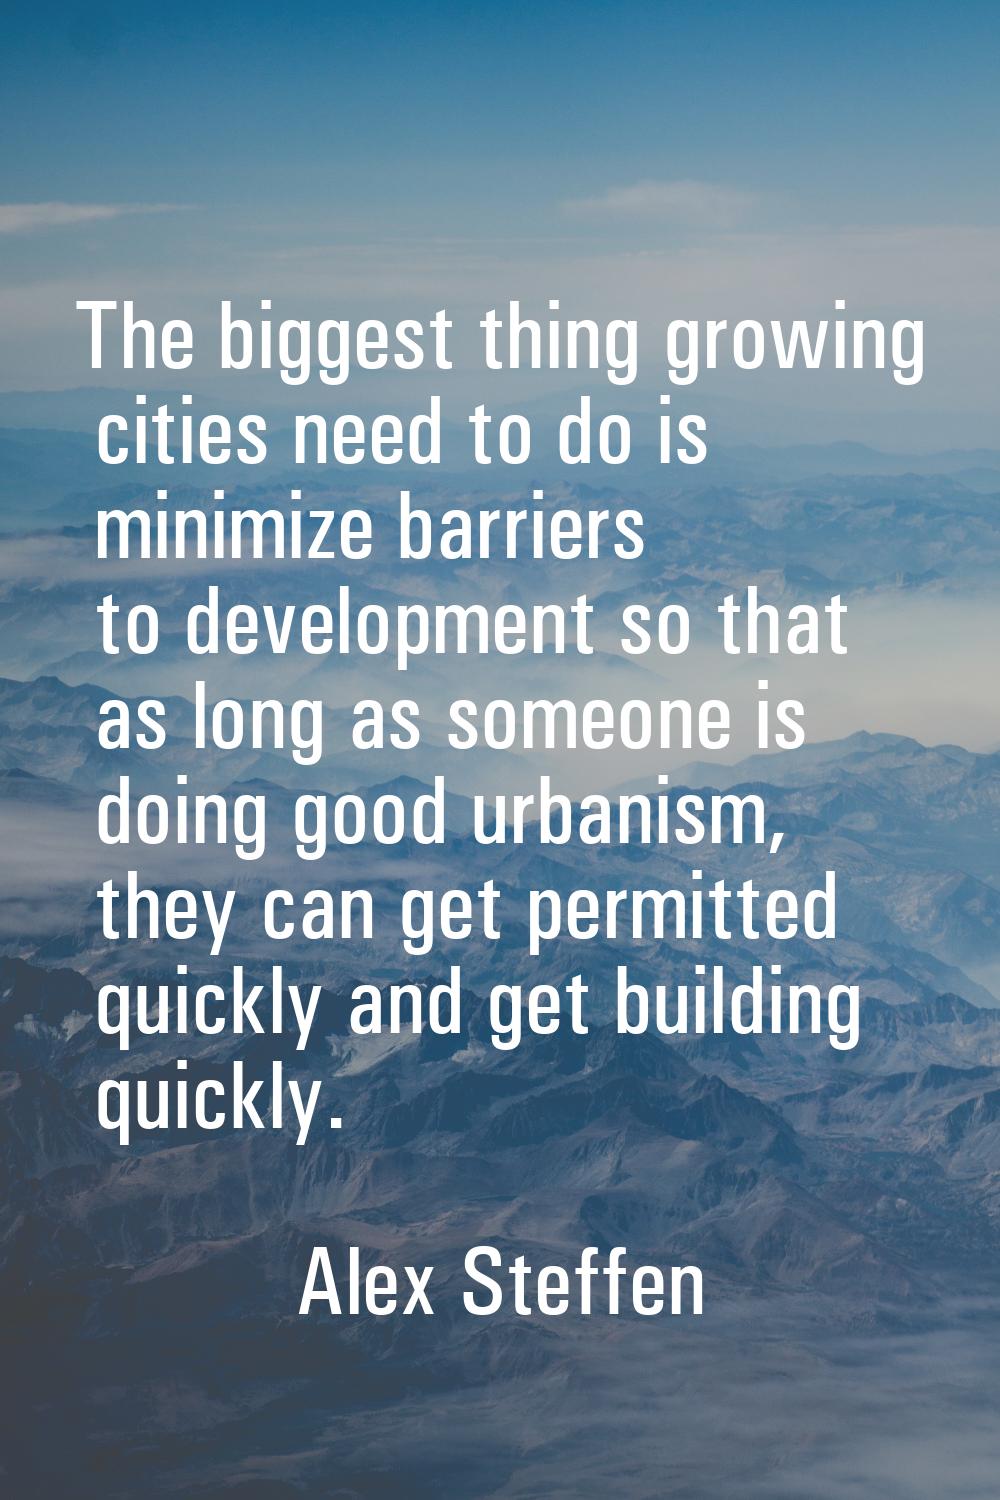 The biggest thing growing cities need to do is minimize barriers to development so that as long as 